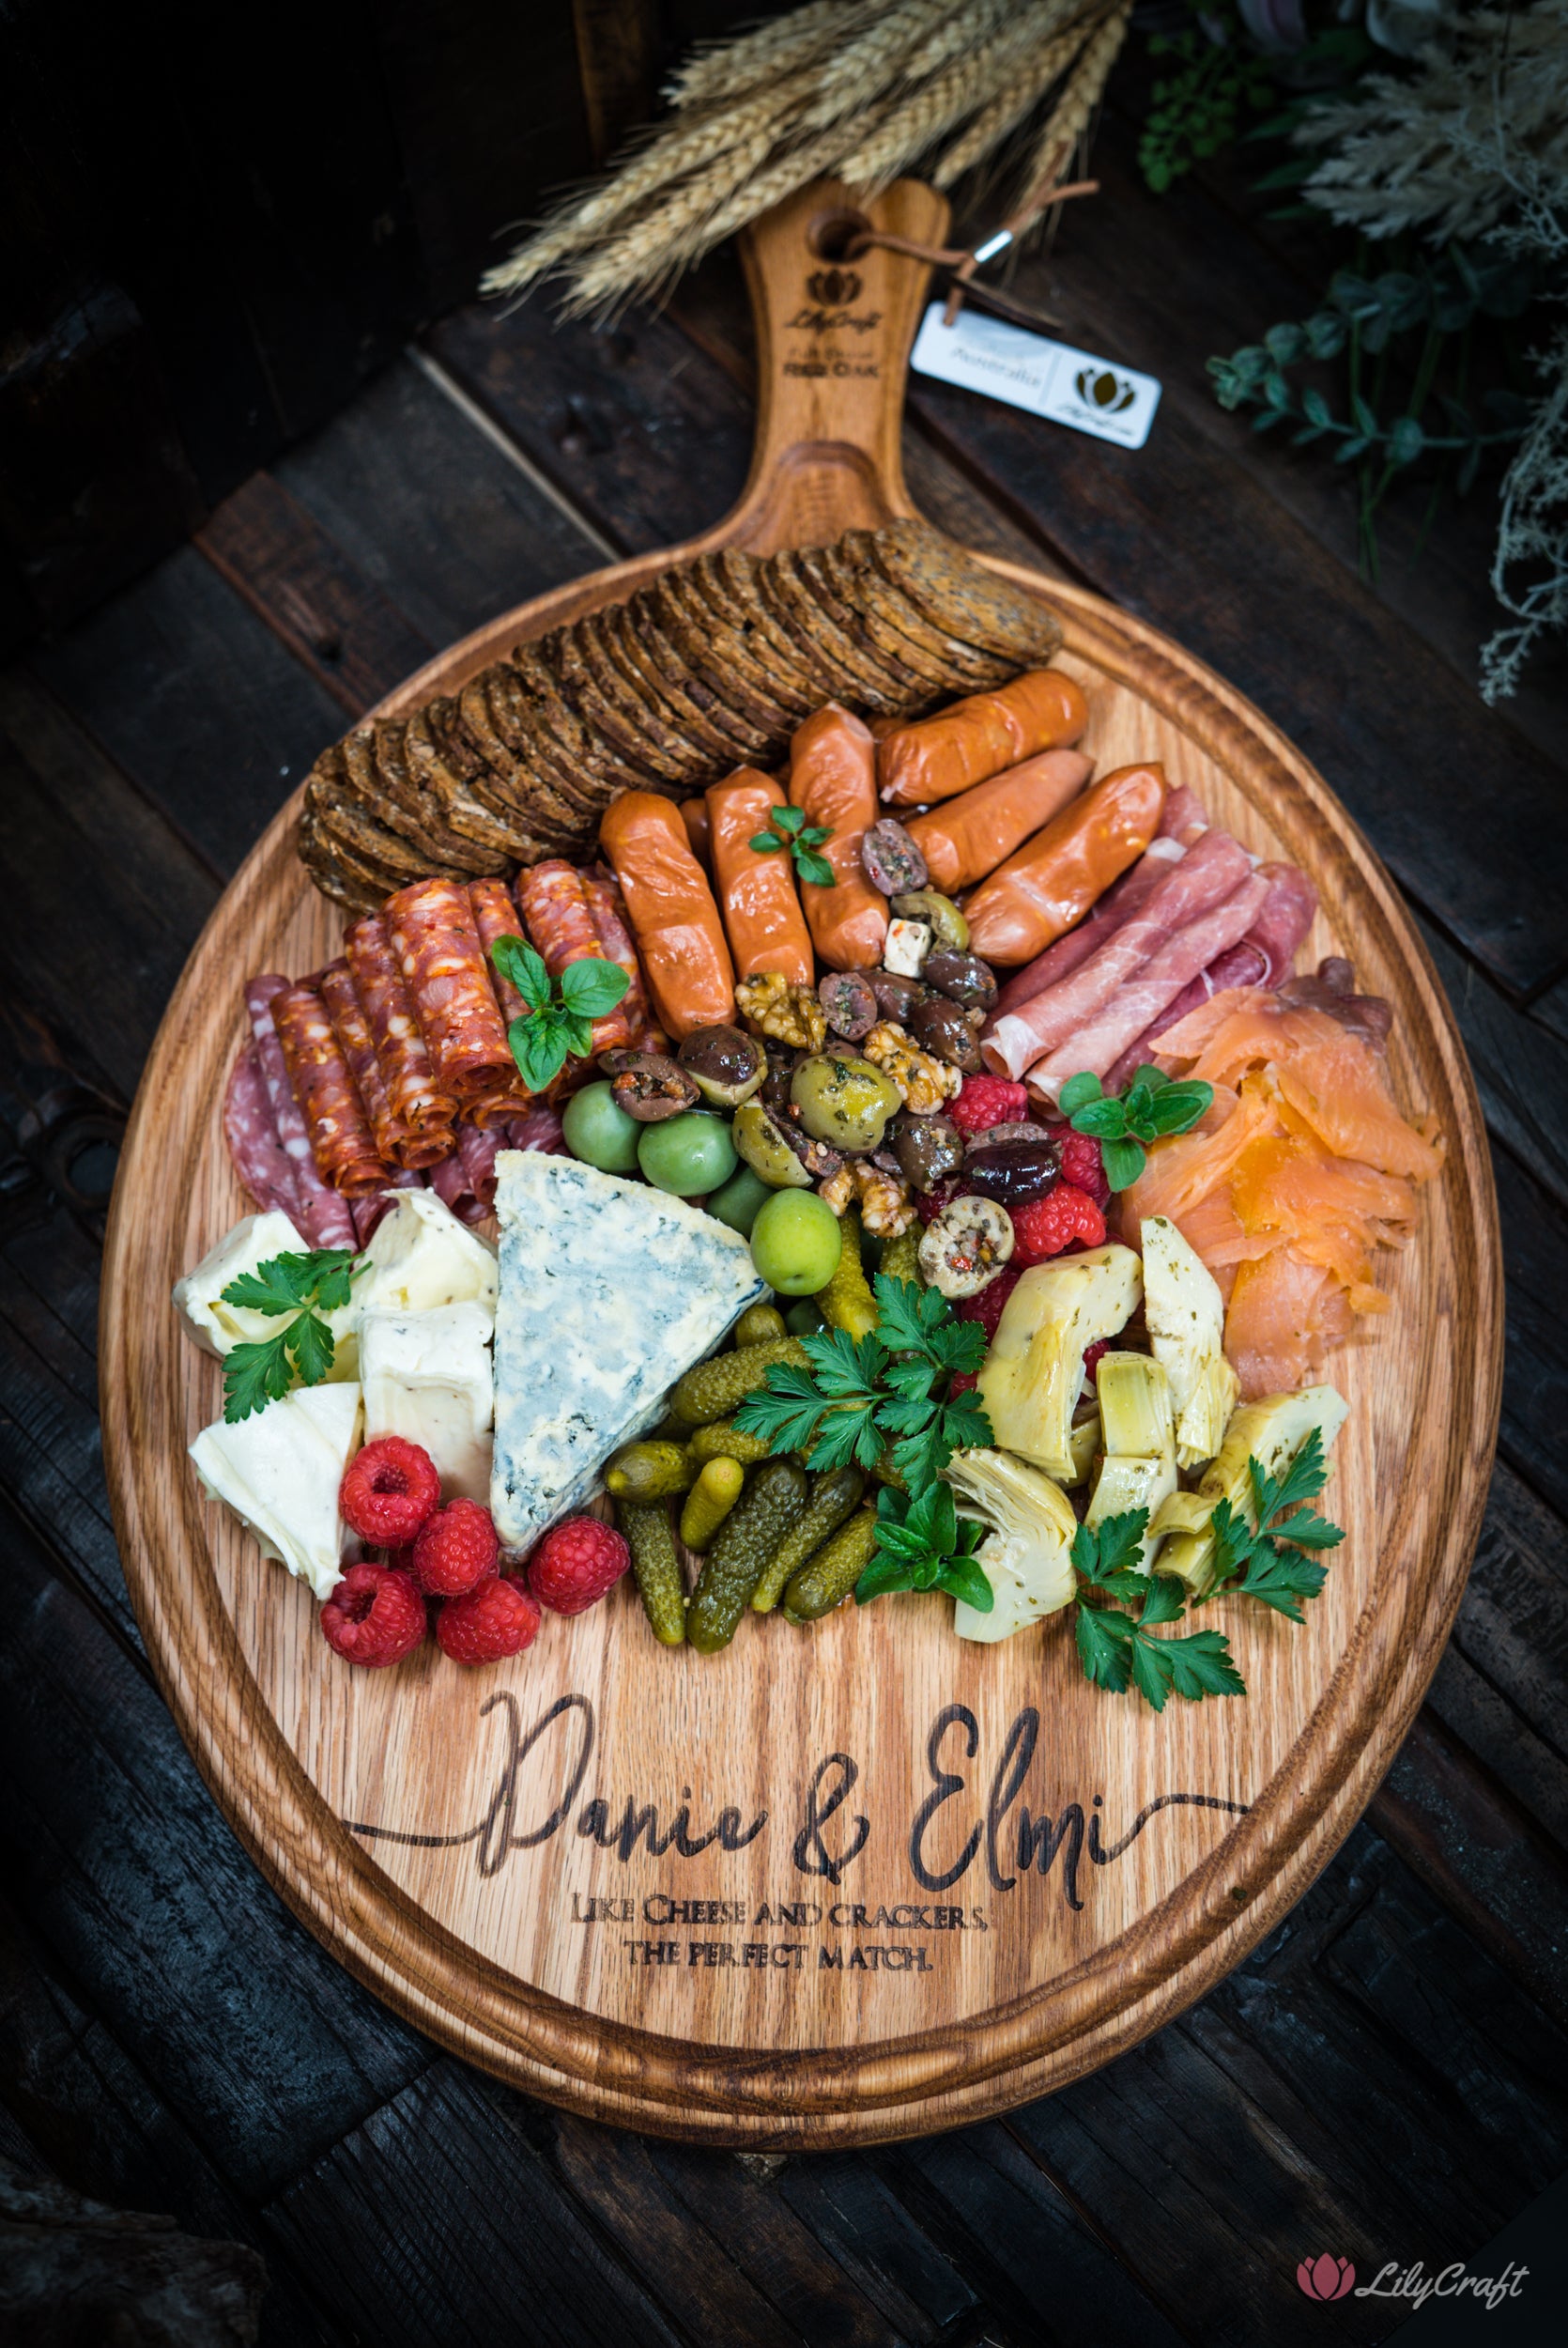 Discover the versatility of our large cheese platter, ideal for hosting gatherings of all sizes. This artisanal wooden cutting board exudes quality, showcasing expert craftsmanship.